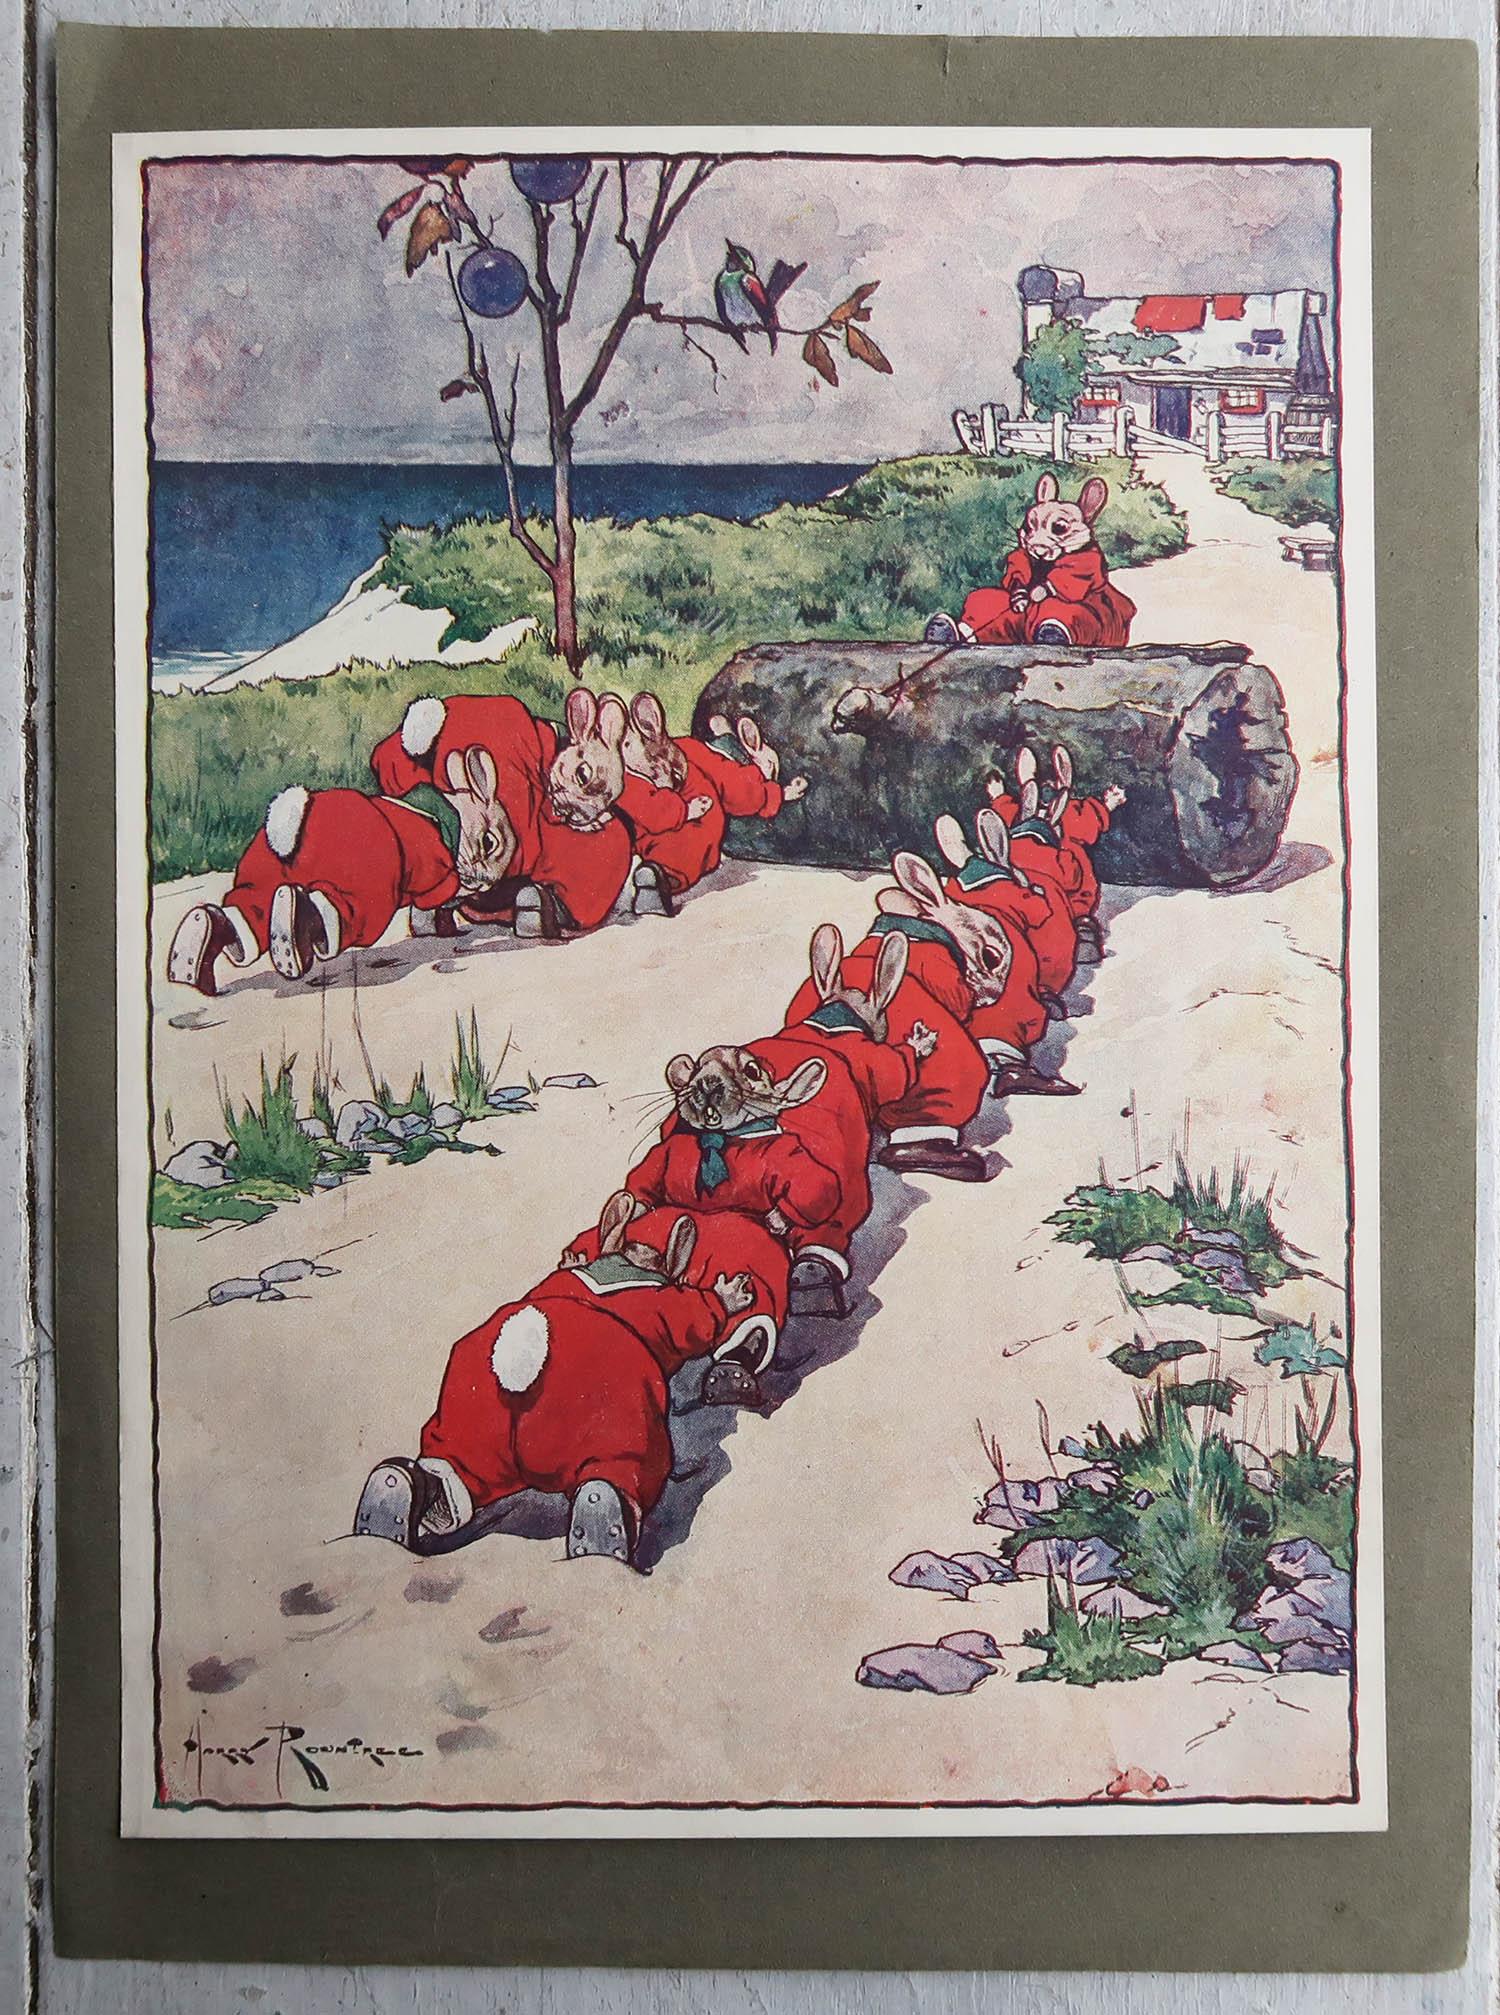 Other Original Vintage Print After Harry Rountree. C.1910 For Sale